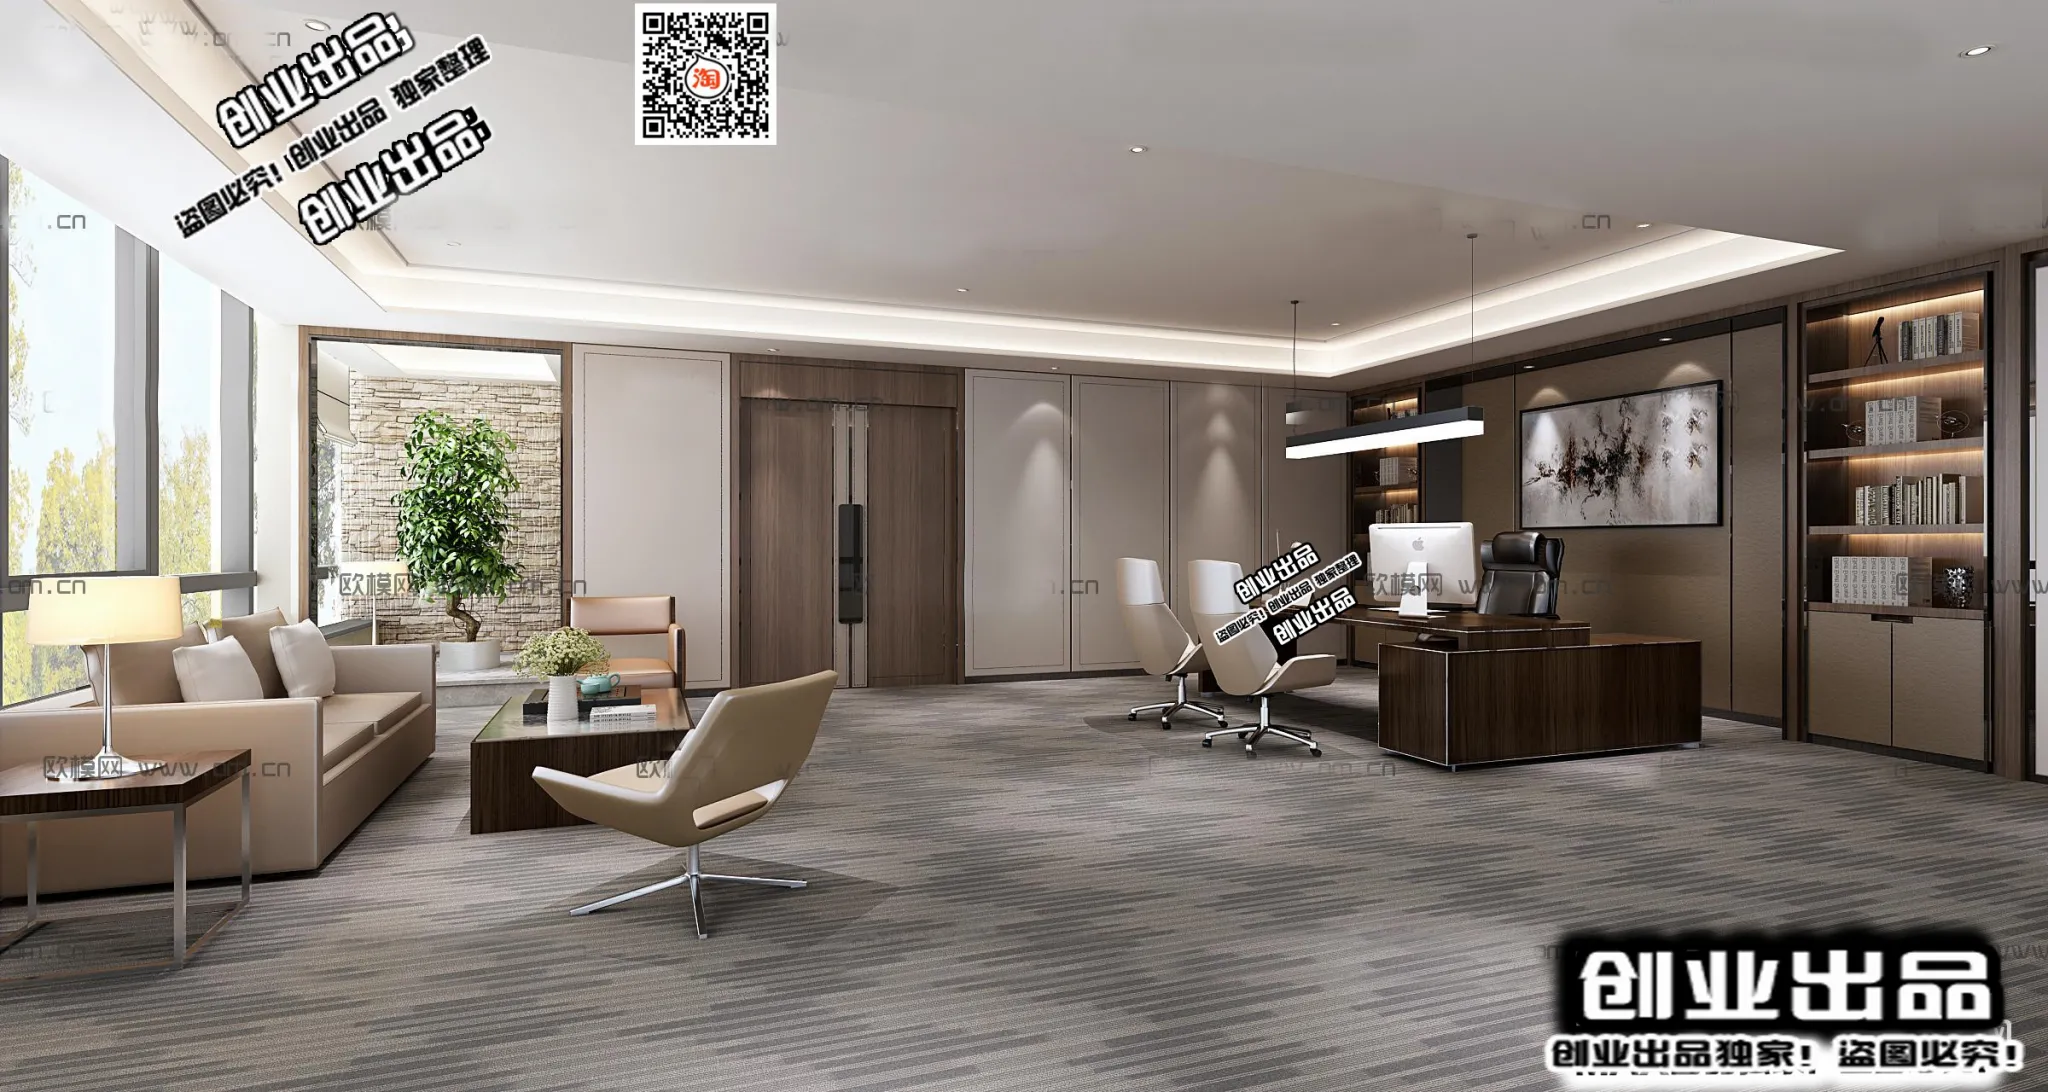 3D OFFICE INTERIOR (VRAY) – MANAGER ROOM 3D SCENES – 138